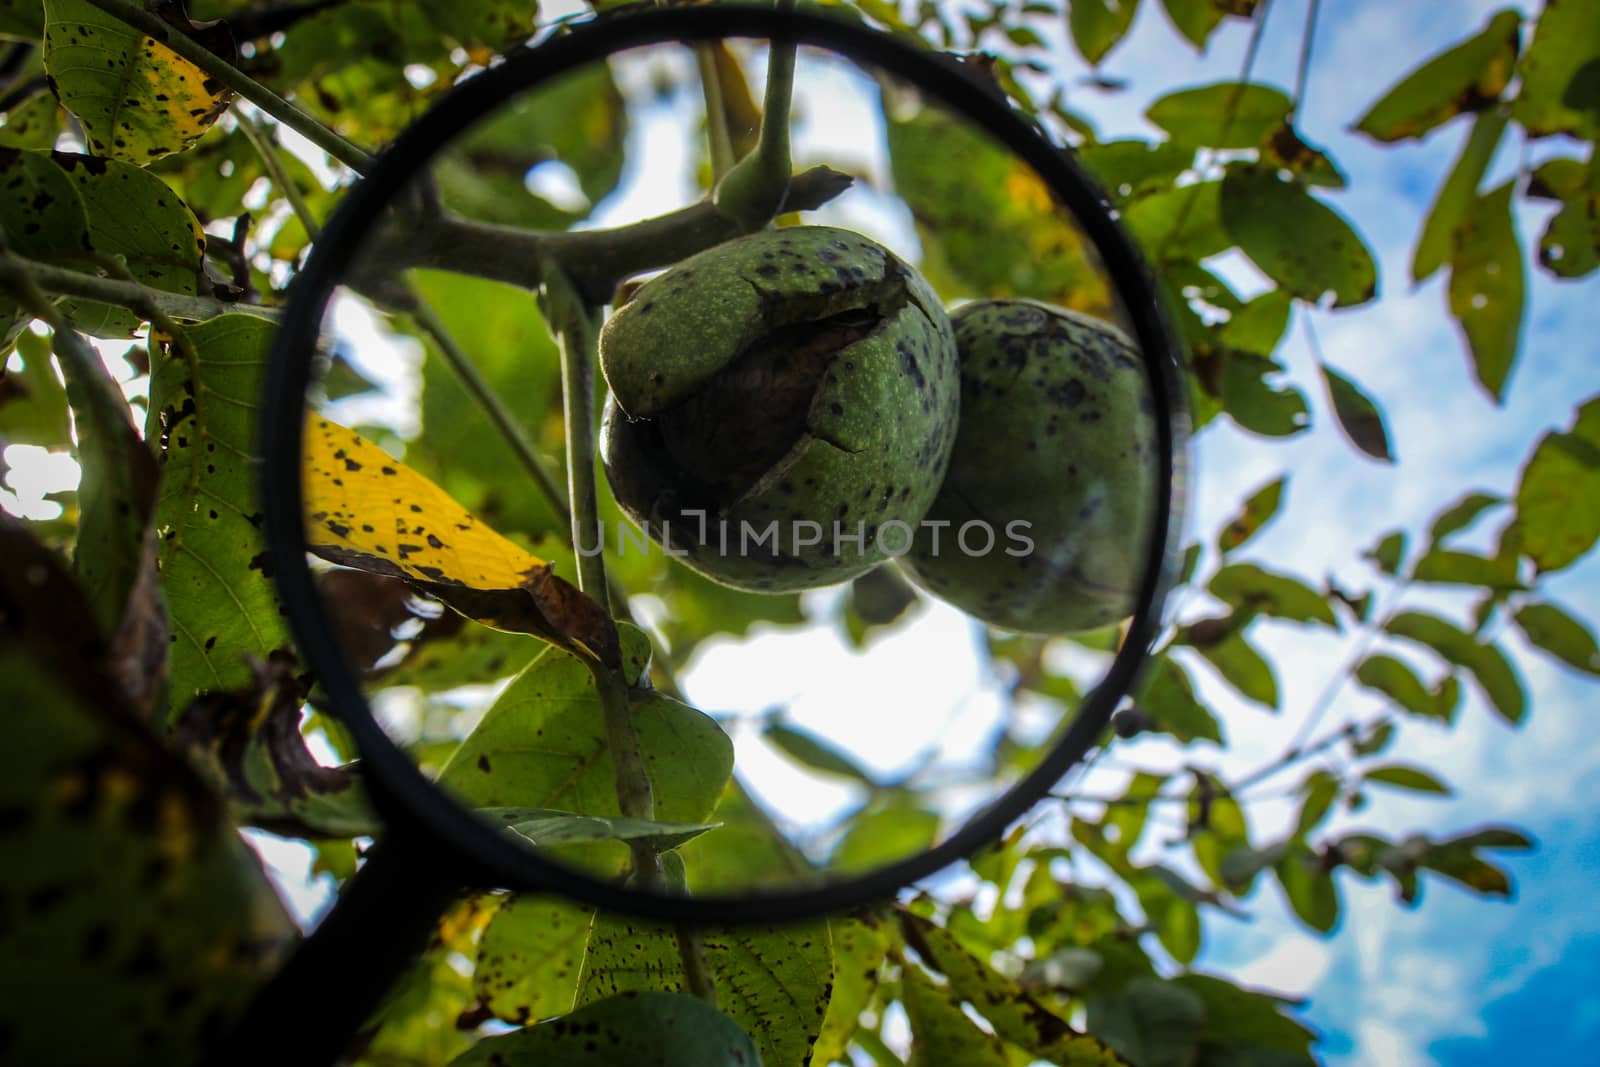 Close up of a ripe walnut inside a cracked green shell on a branch. Walnut fruit enlarged with a magnifying glass. Zavidovici, Bosnia and Herzegovina.